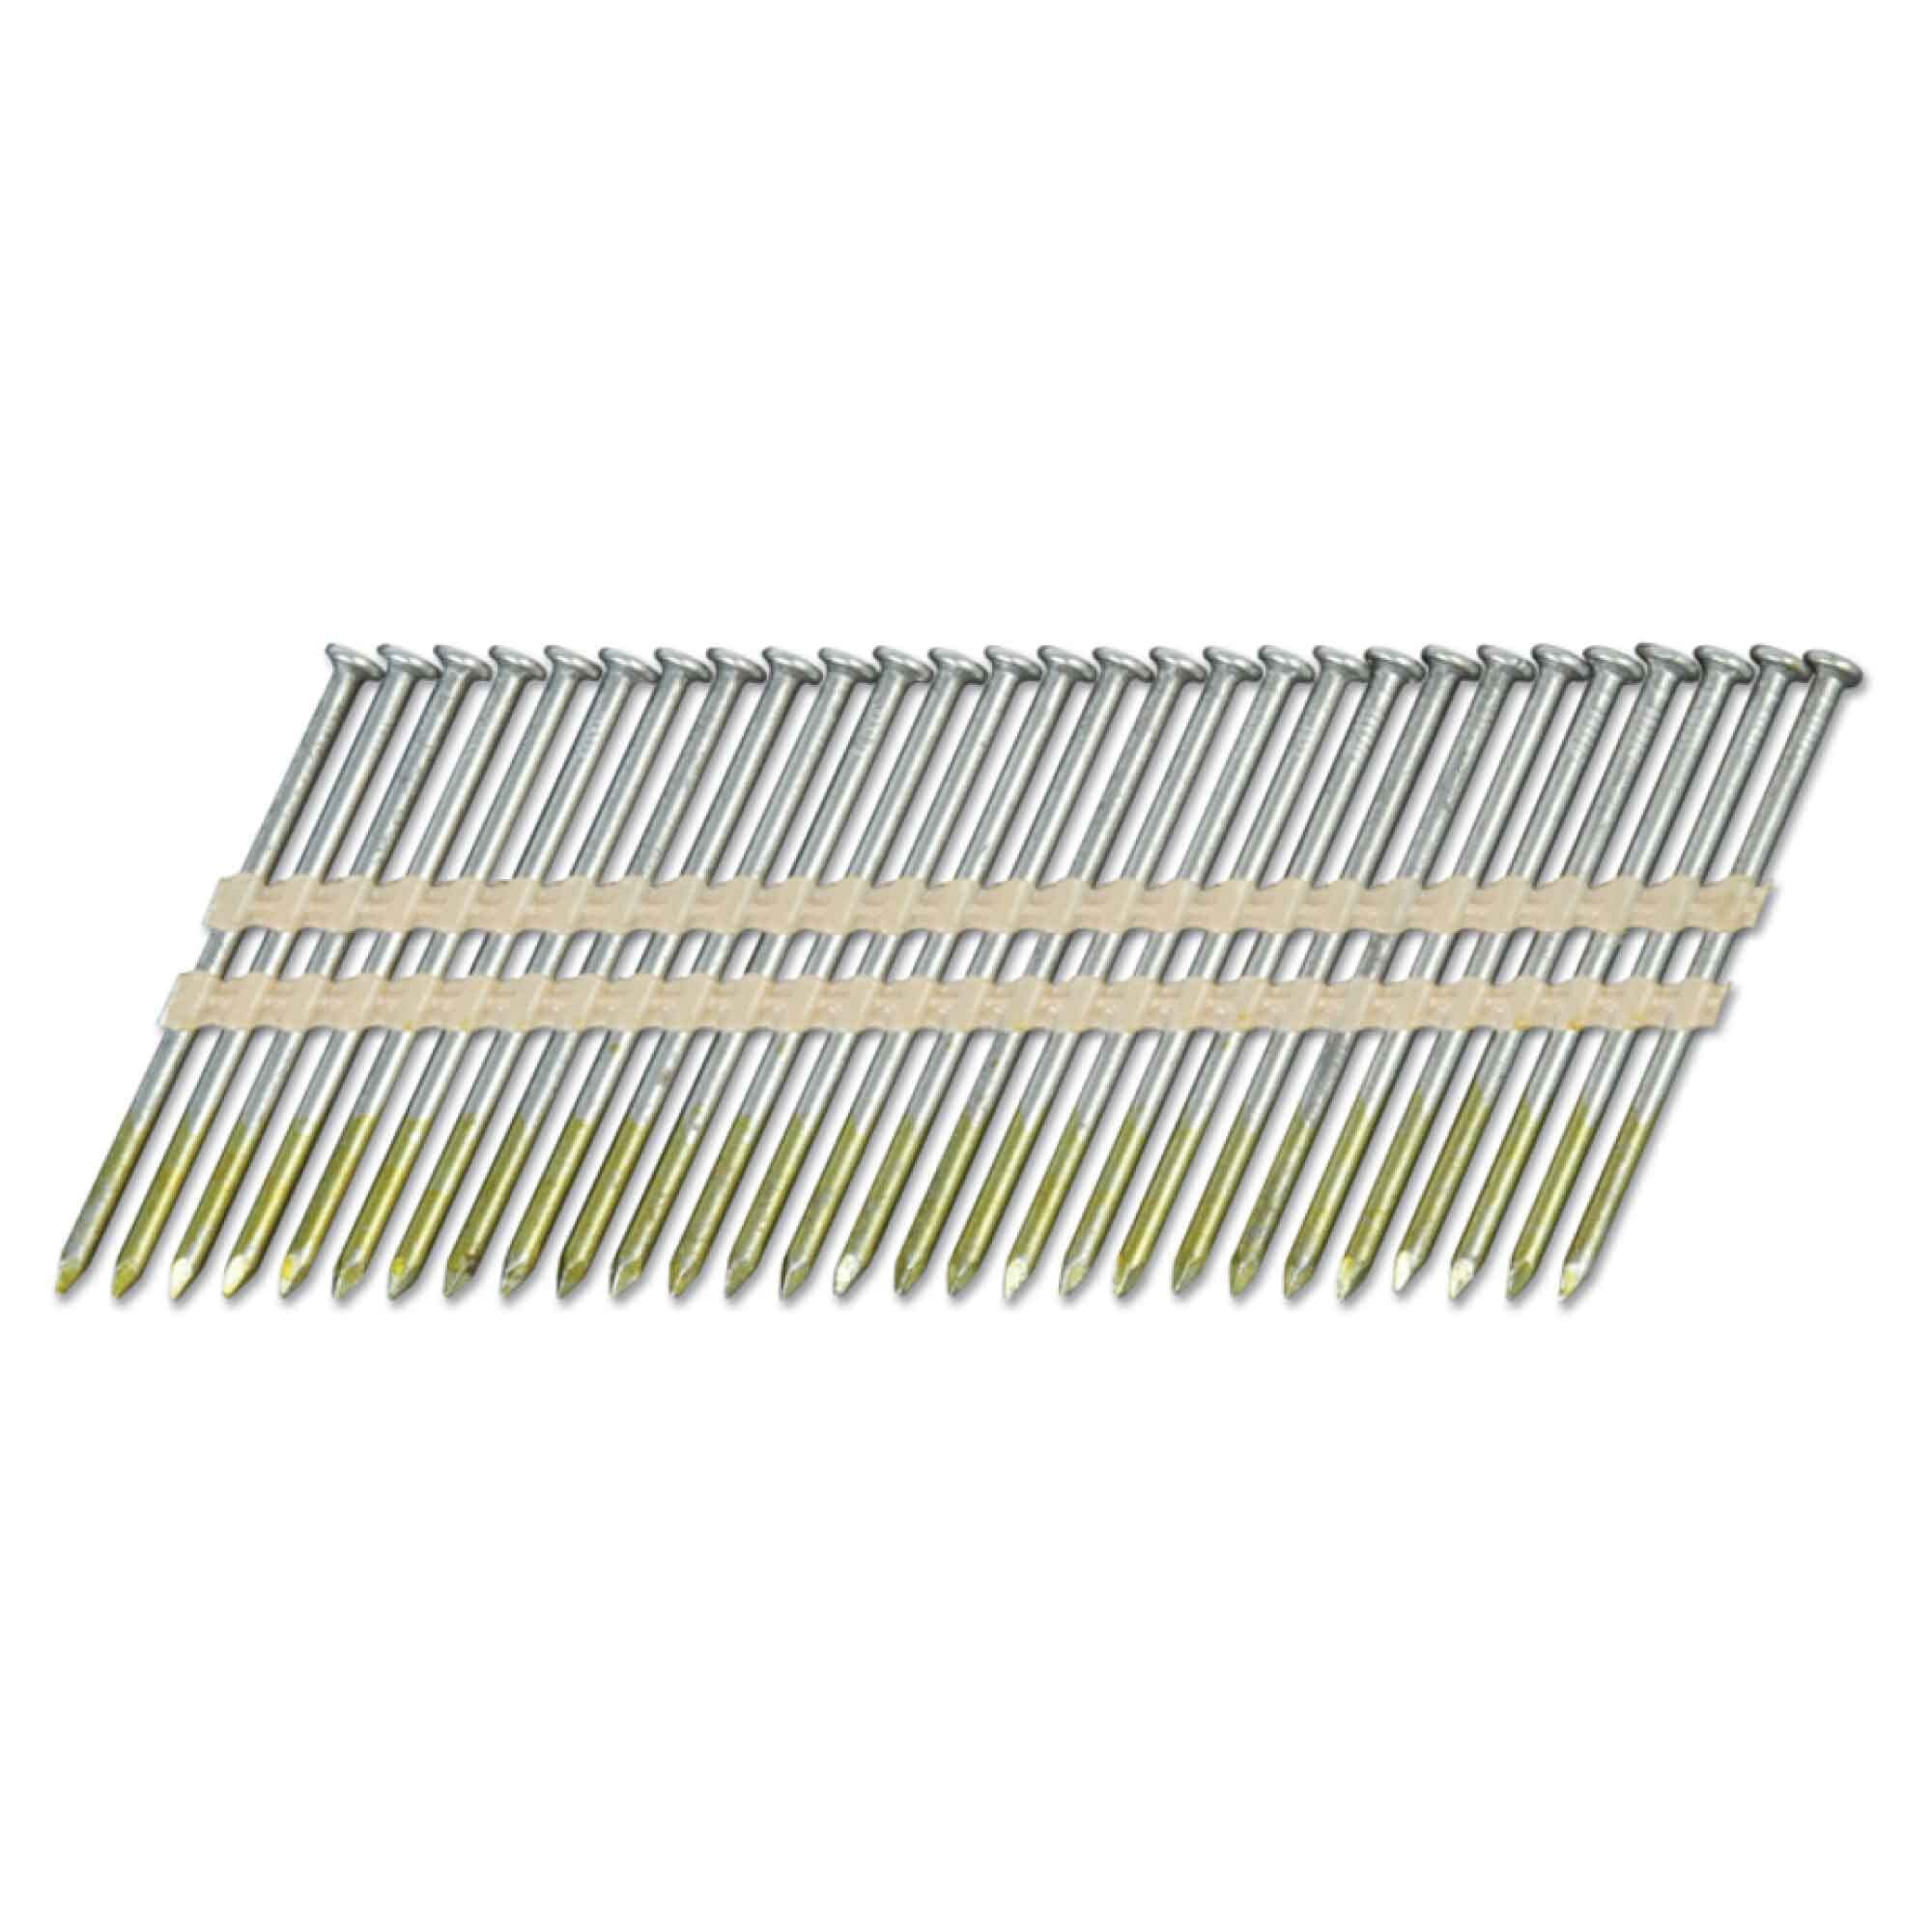 Metabo HPT Framing Nails | 3-1/4 Inch x .131 | Full Round Head | Brite, Basic | Plastic Strip | 1000 Count | 20111SHPT